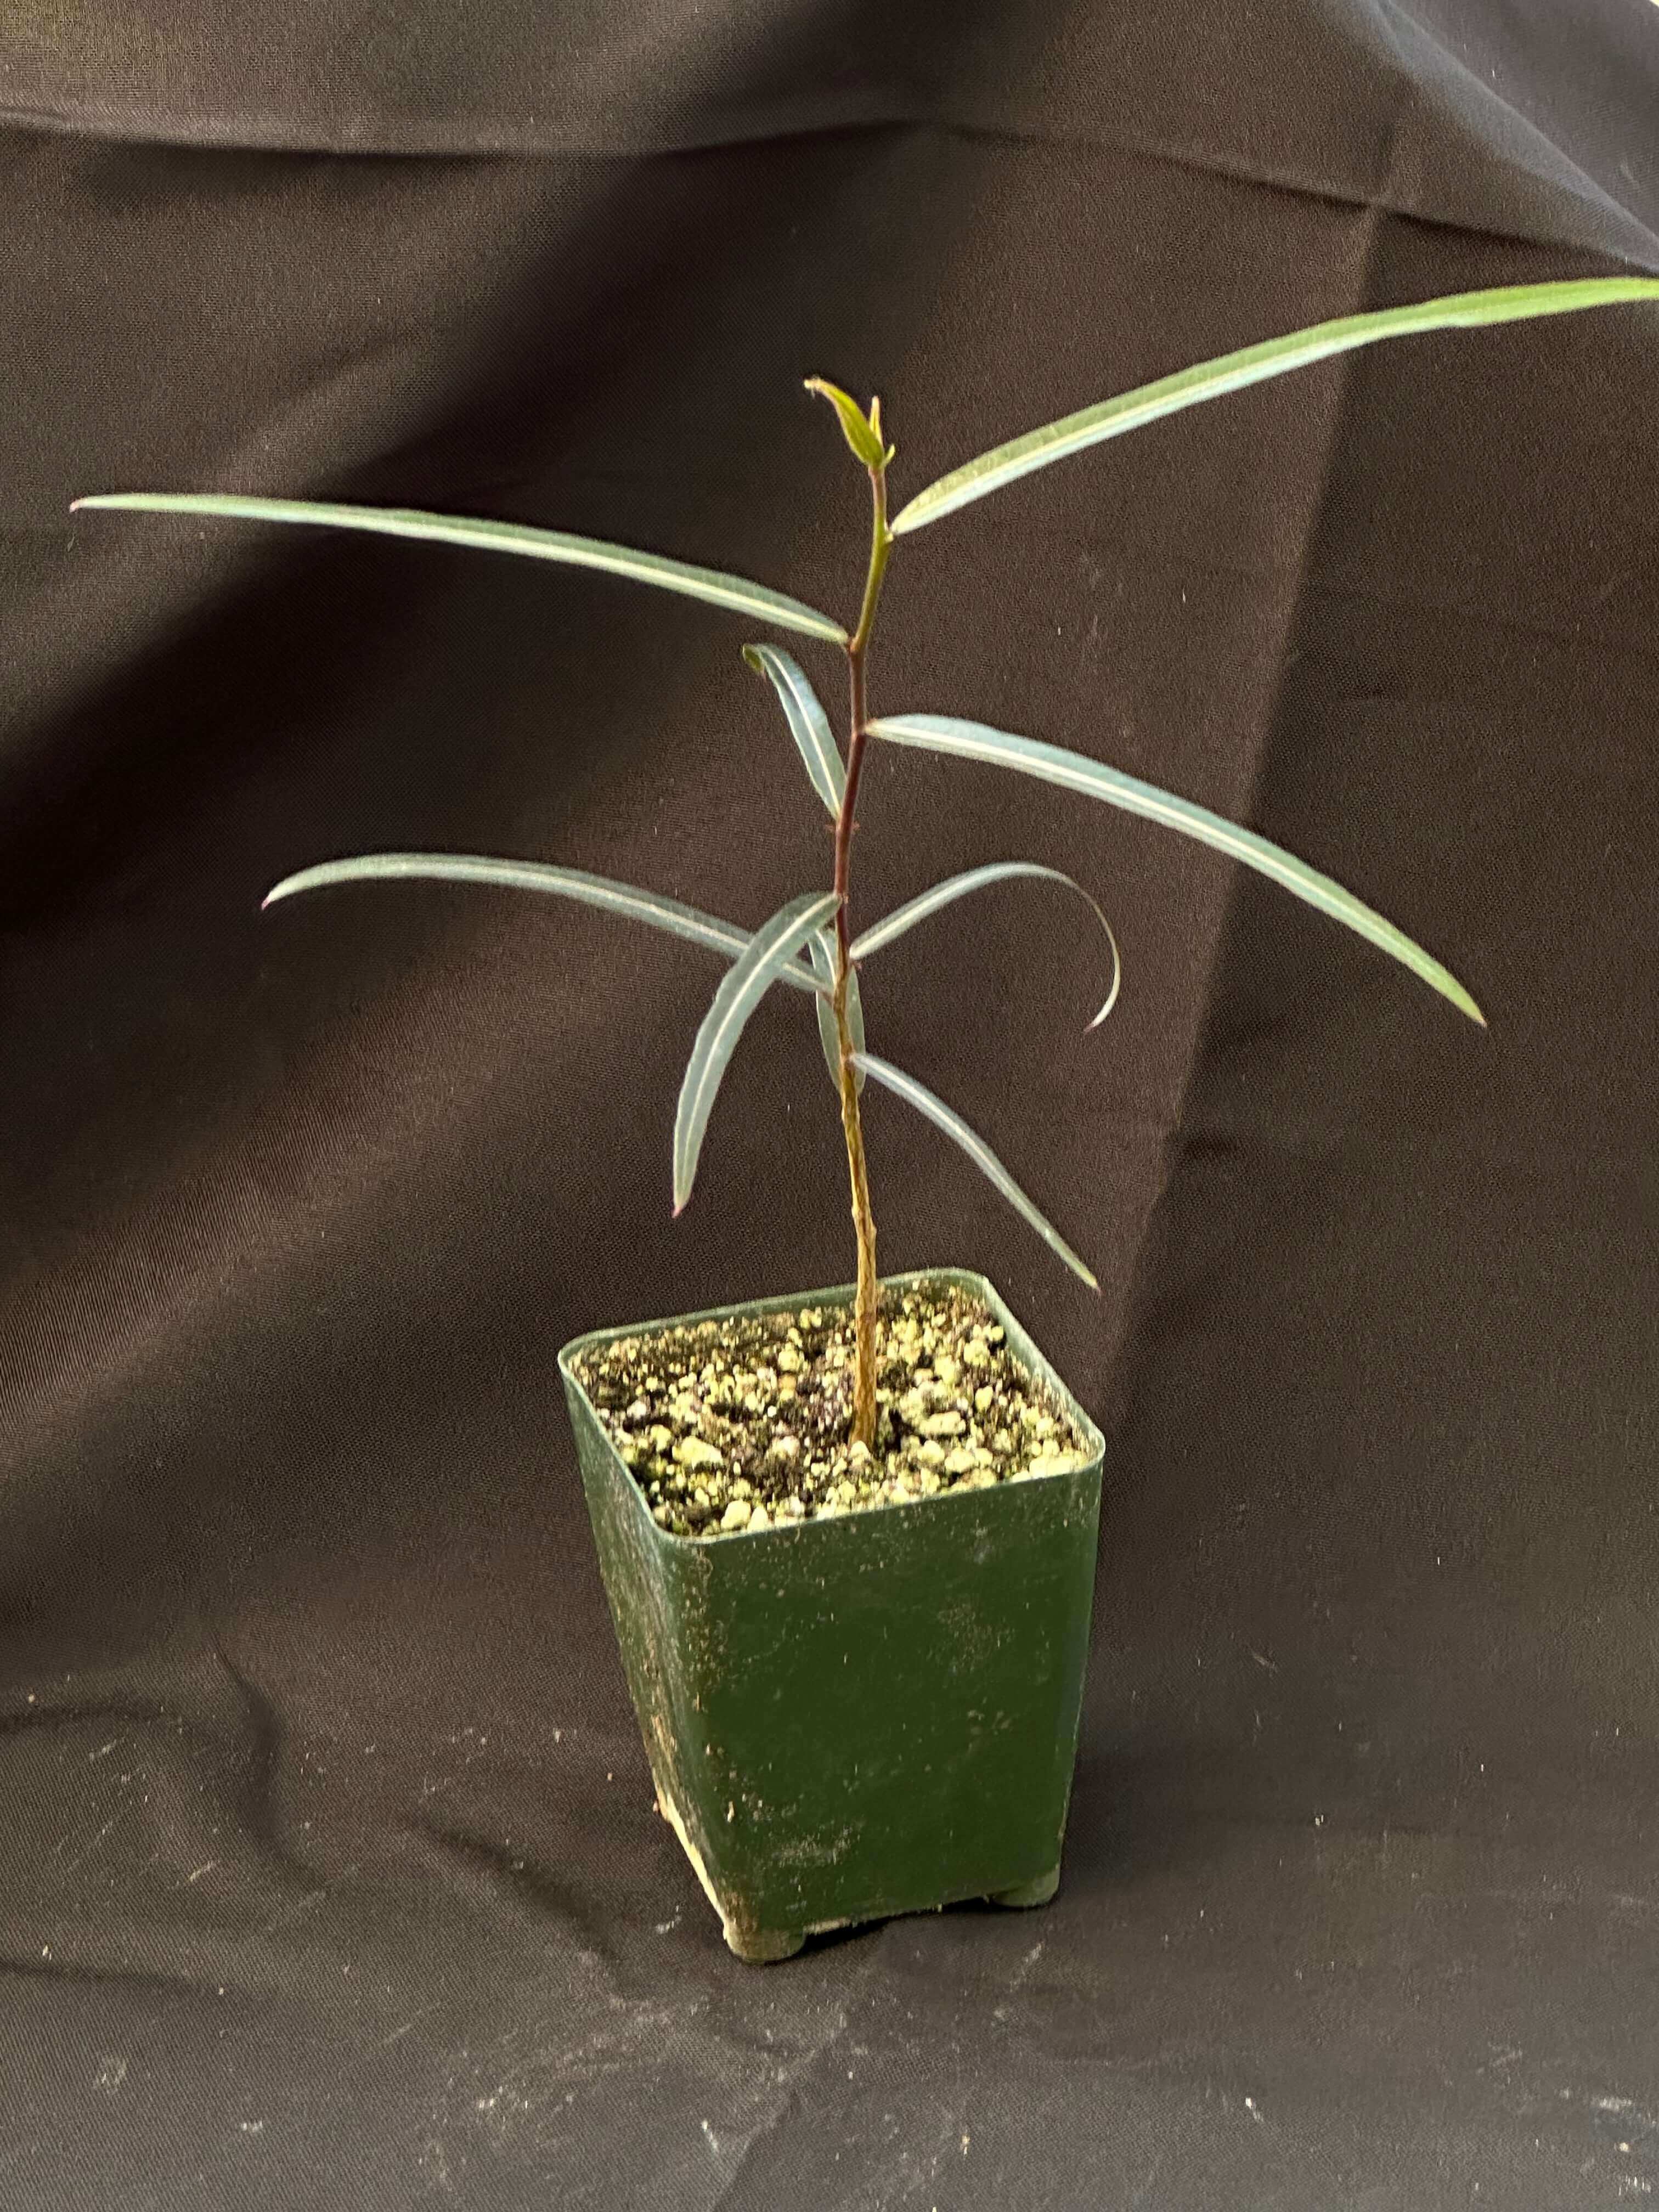 Nursery pot containing a Brachychiton Rupestris, highlighting the early development of its distinctive swollen trunk, adapted for water storage.